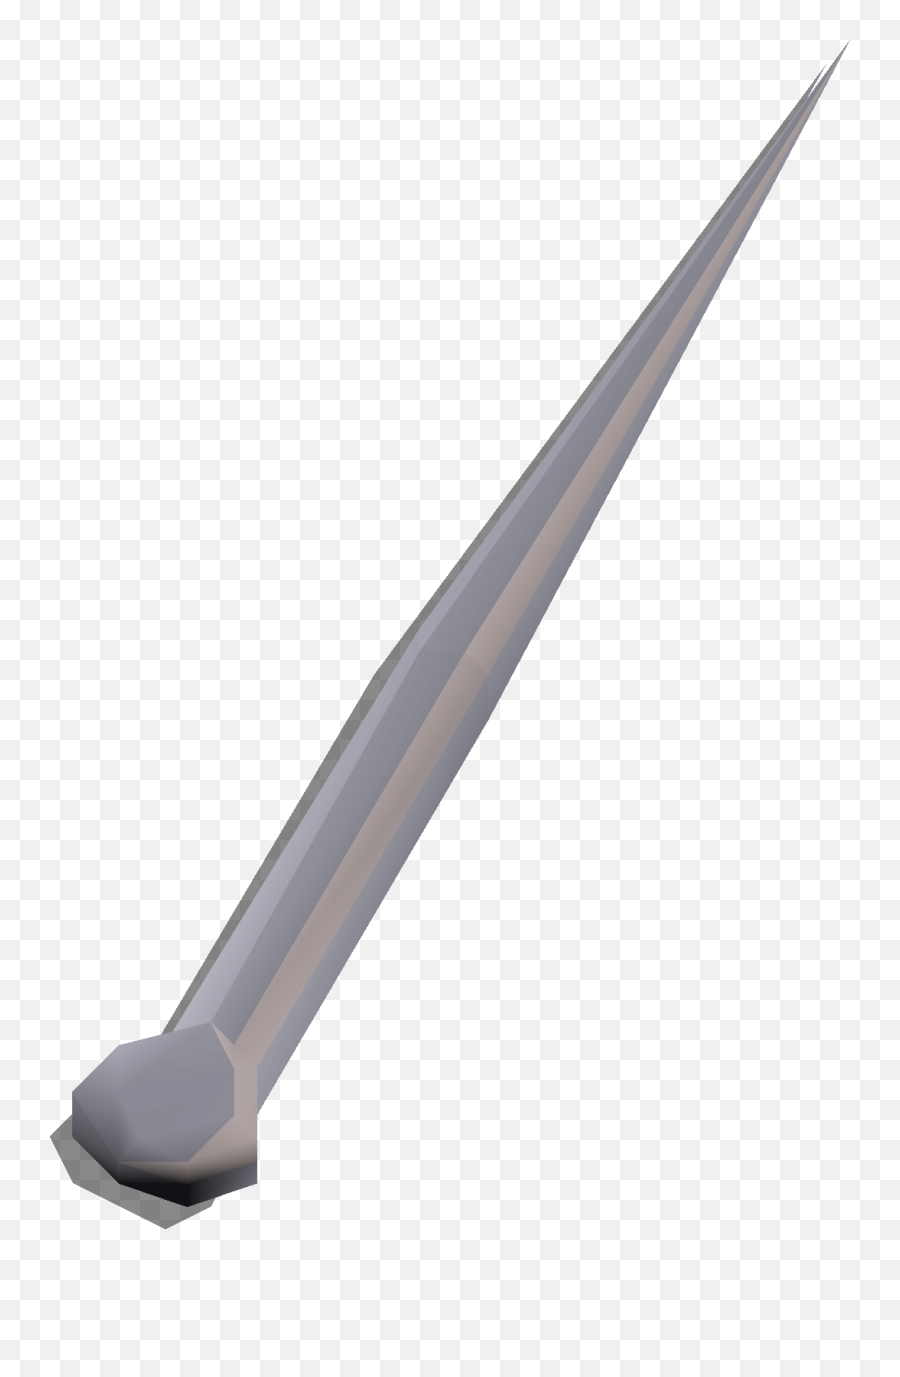 Needle - Osrs Wiki Sword Png,Needle And Thread Png